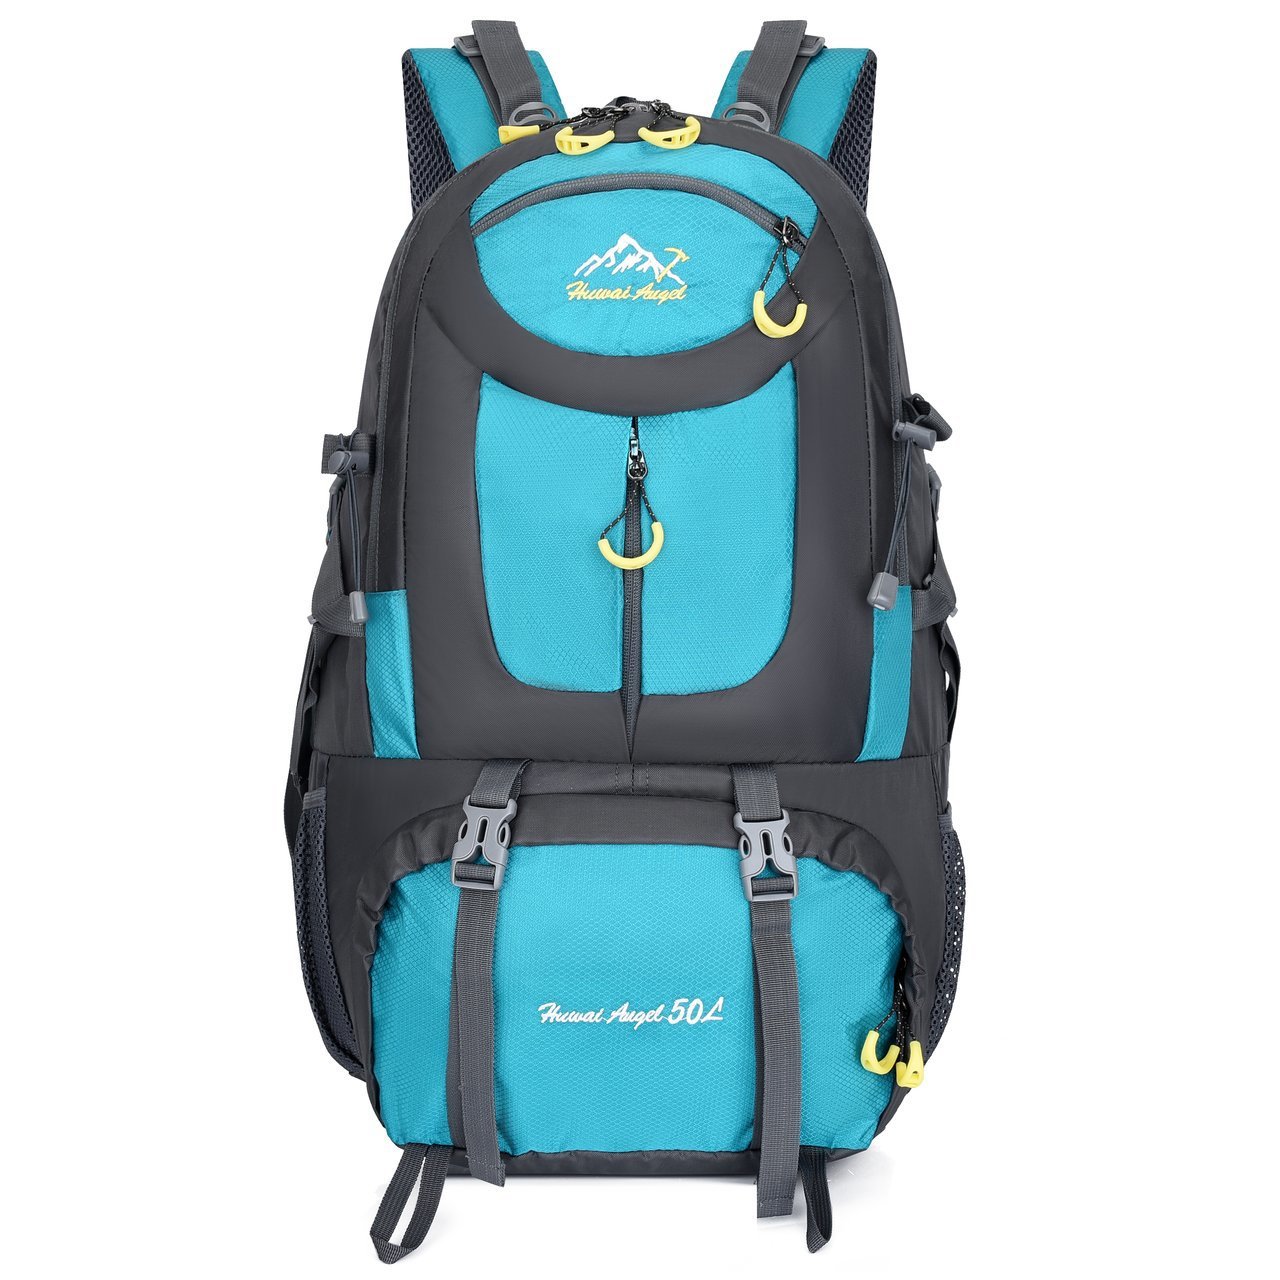 blue outdoor sports trekking hiking travel bags backpack